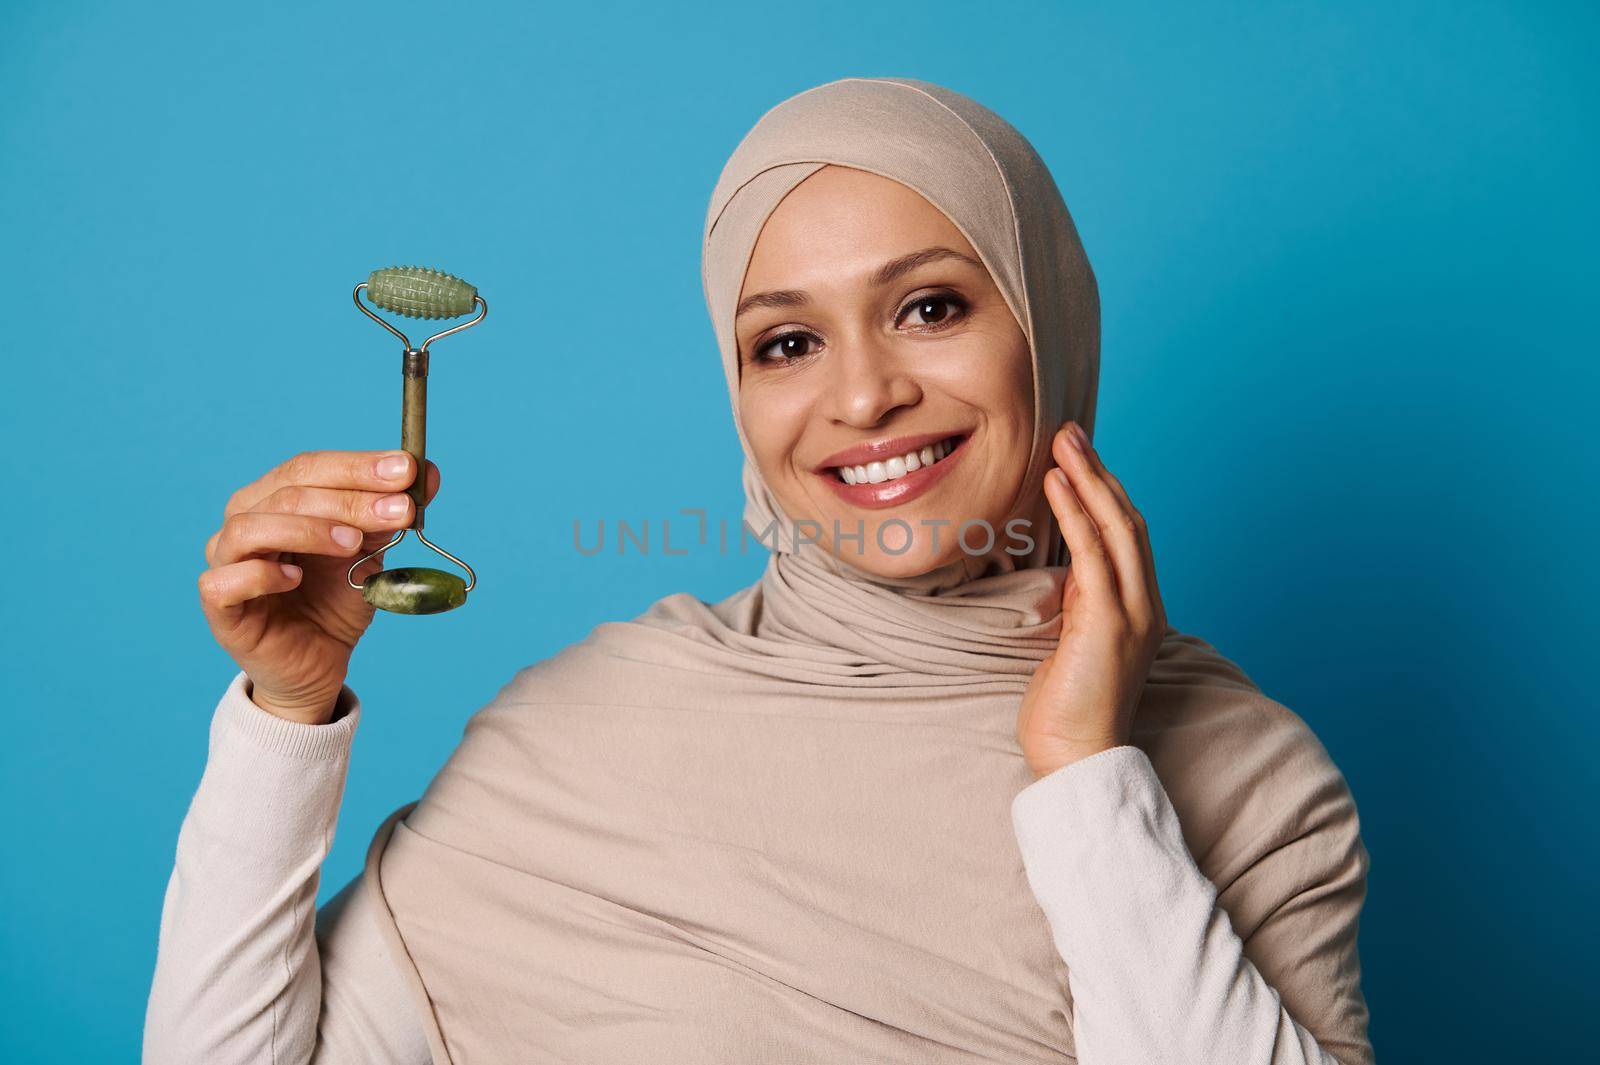 Smiling Muslim woman wearing a beige hijab holding a jade roller massager, posing looking at camera over blue background with space for text